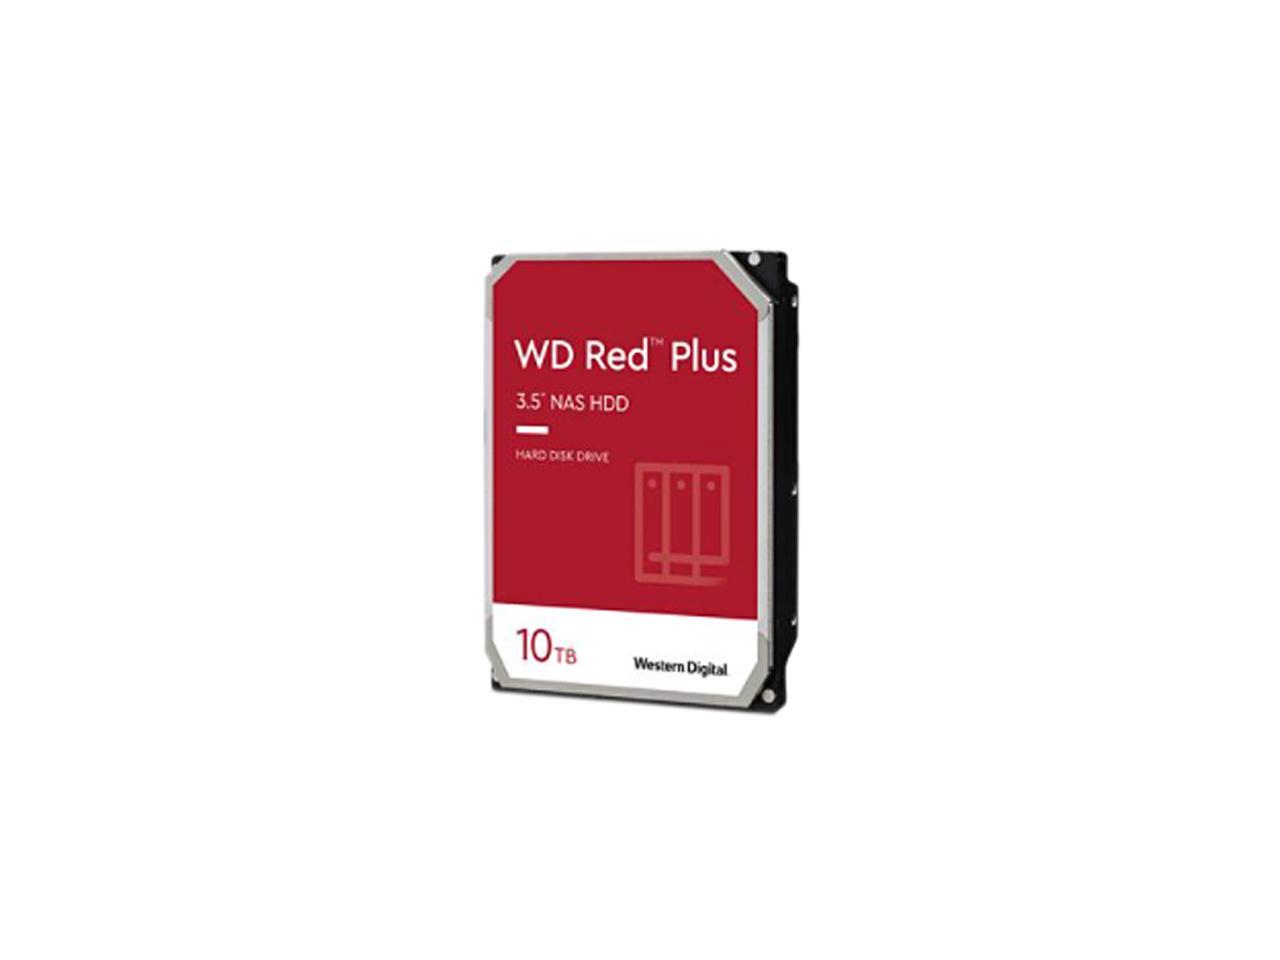 WD Red Plus 10TB NAS Hard Disk Drive - 7200 RPM Class SATA 6Gb/s, CMR, 256MB Cache, 3.5 Inch - WD101EFBX